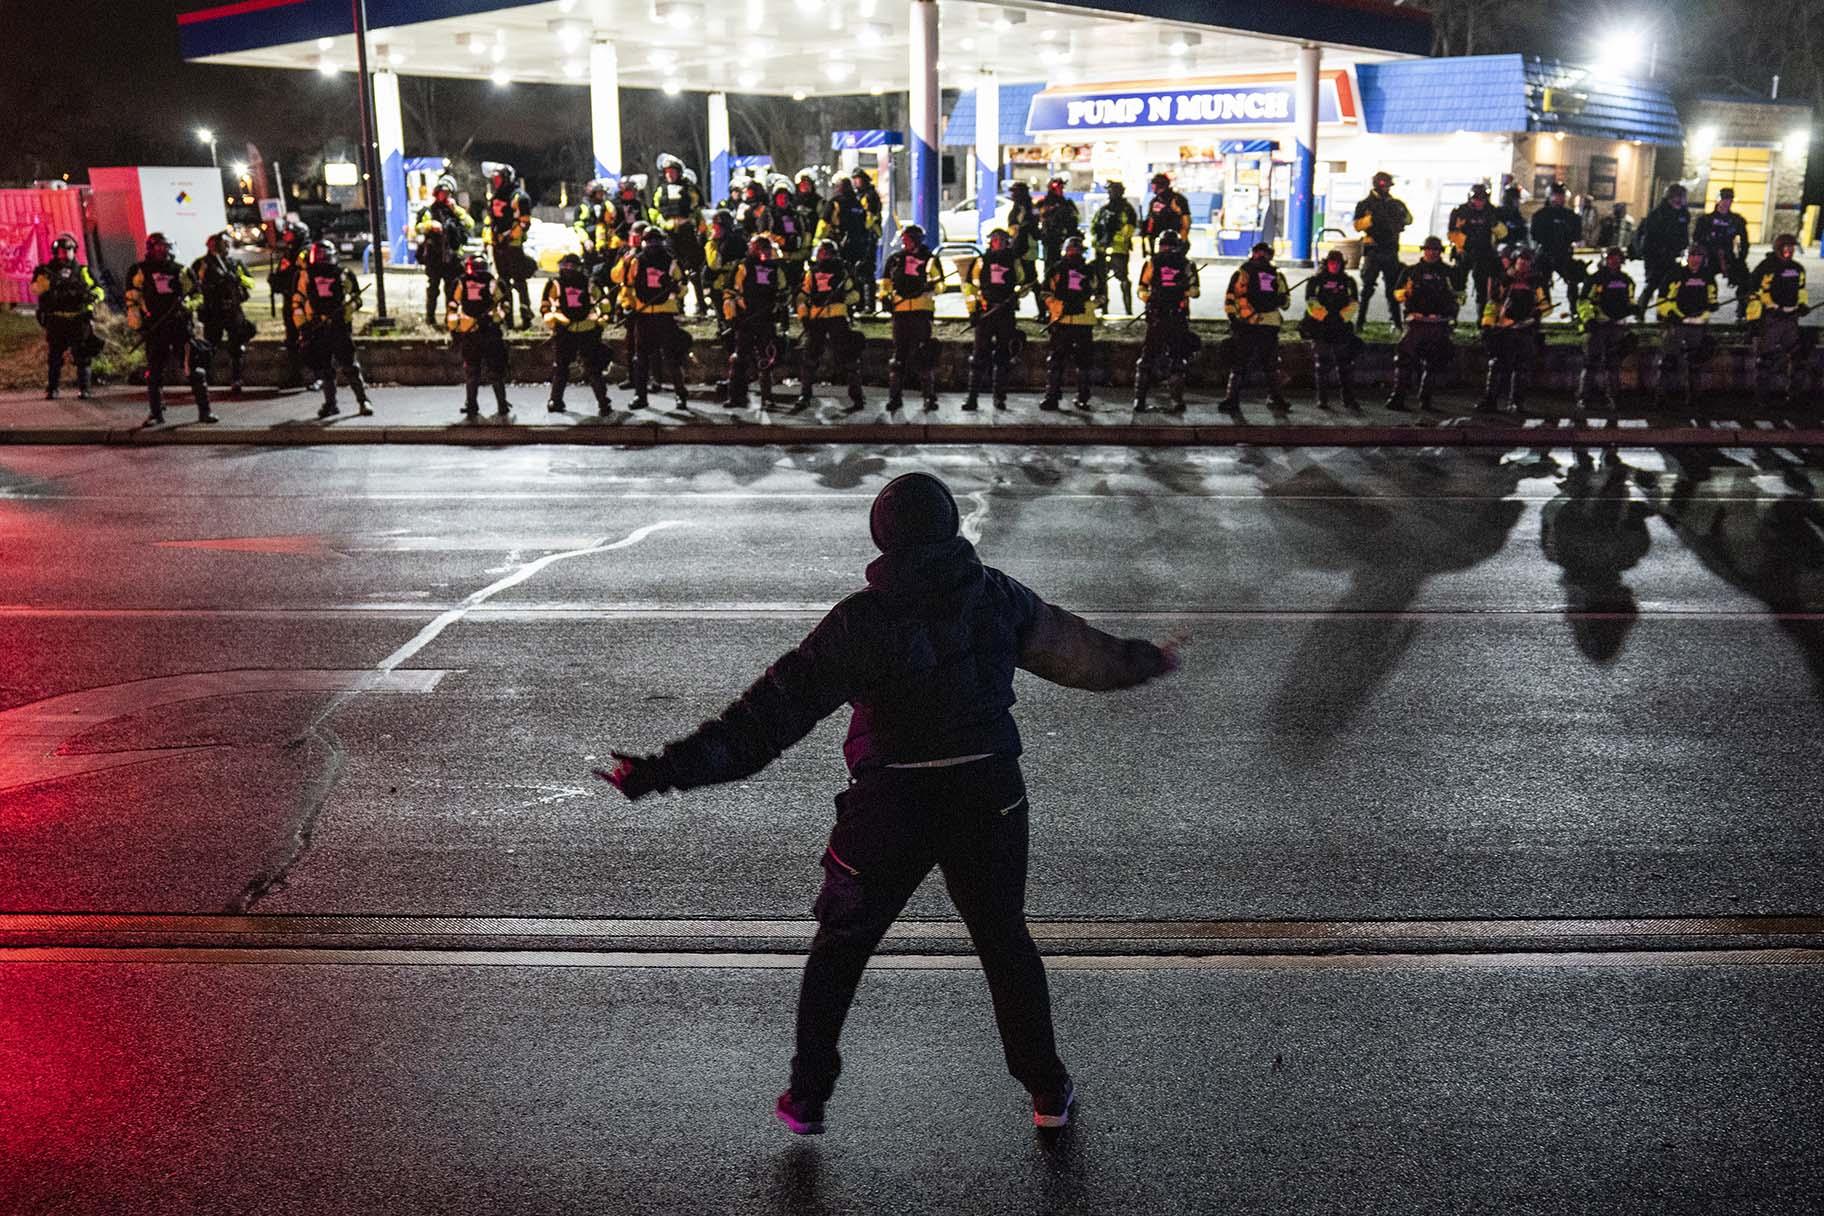 A demonstrator heckles authorities who advanced into a gas station after issuing orders for crowds to disperse during a protest against the police shooting of Daunte Wright, late Monday, April 12, 2021, in Brooklyn Center, Minn. (AP Photo / John Minchillo)